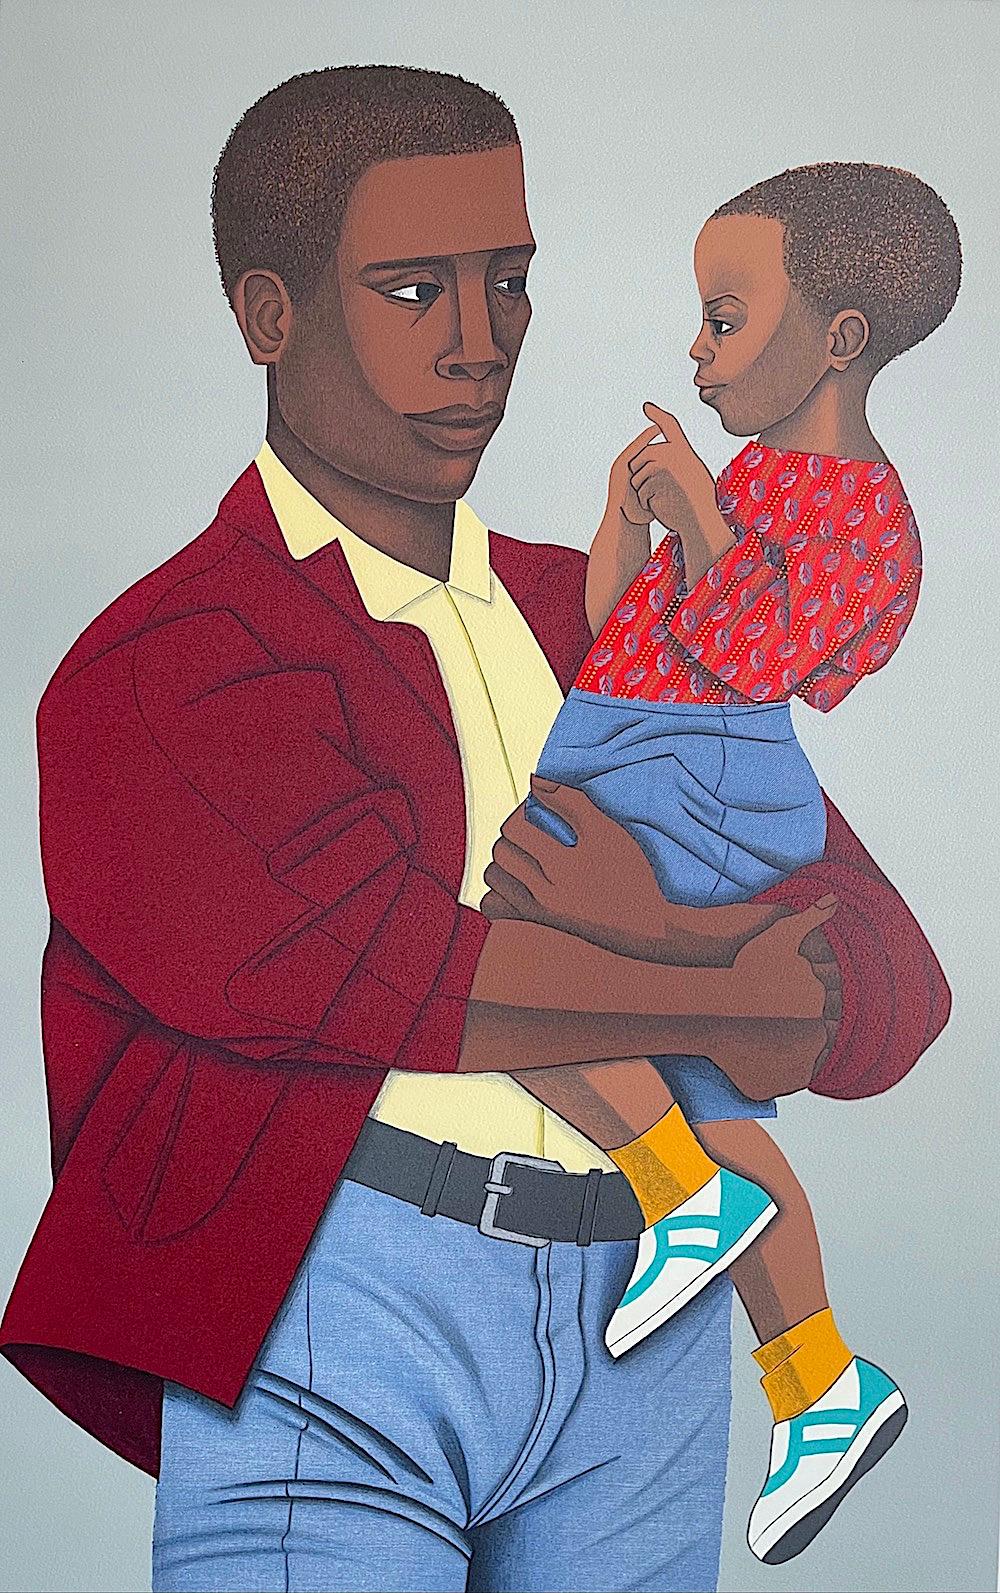 NEW GENERATION Signed Lithograph, Black Father Holding Son, Family Portrait - Print by Elizabeth Catlett